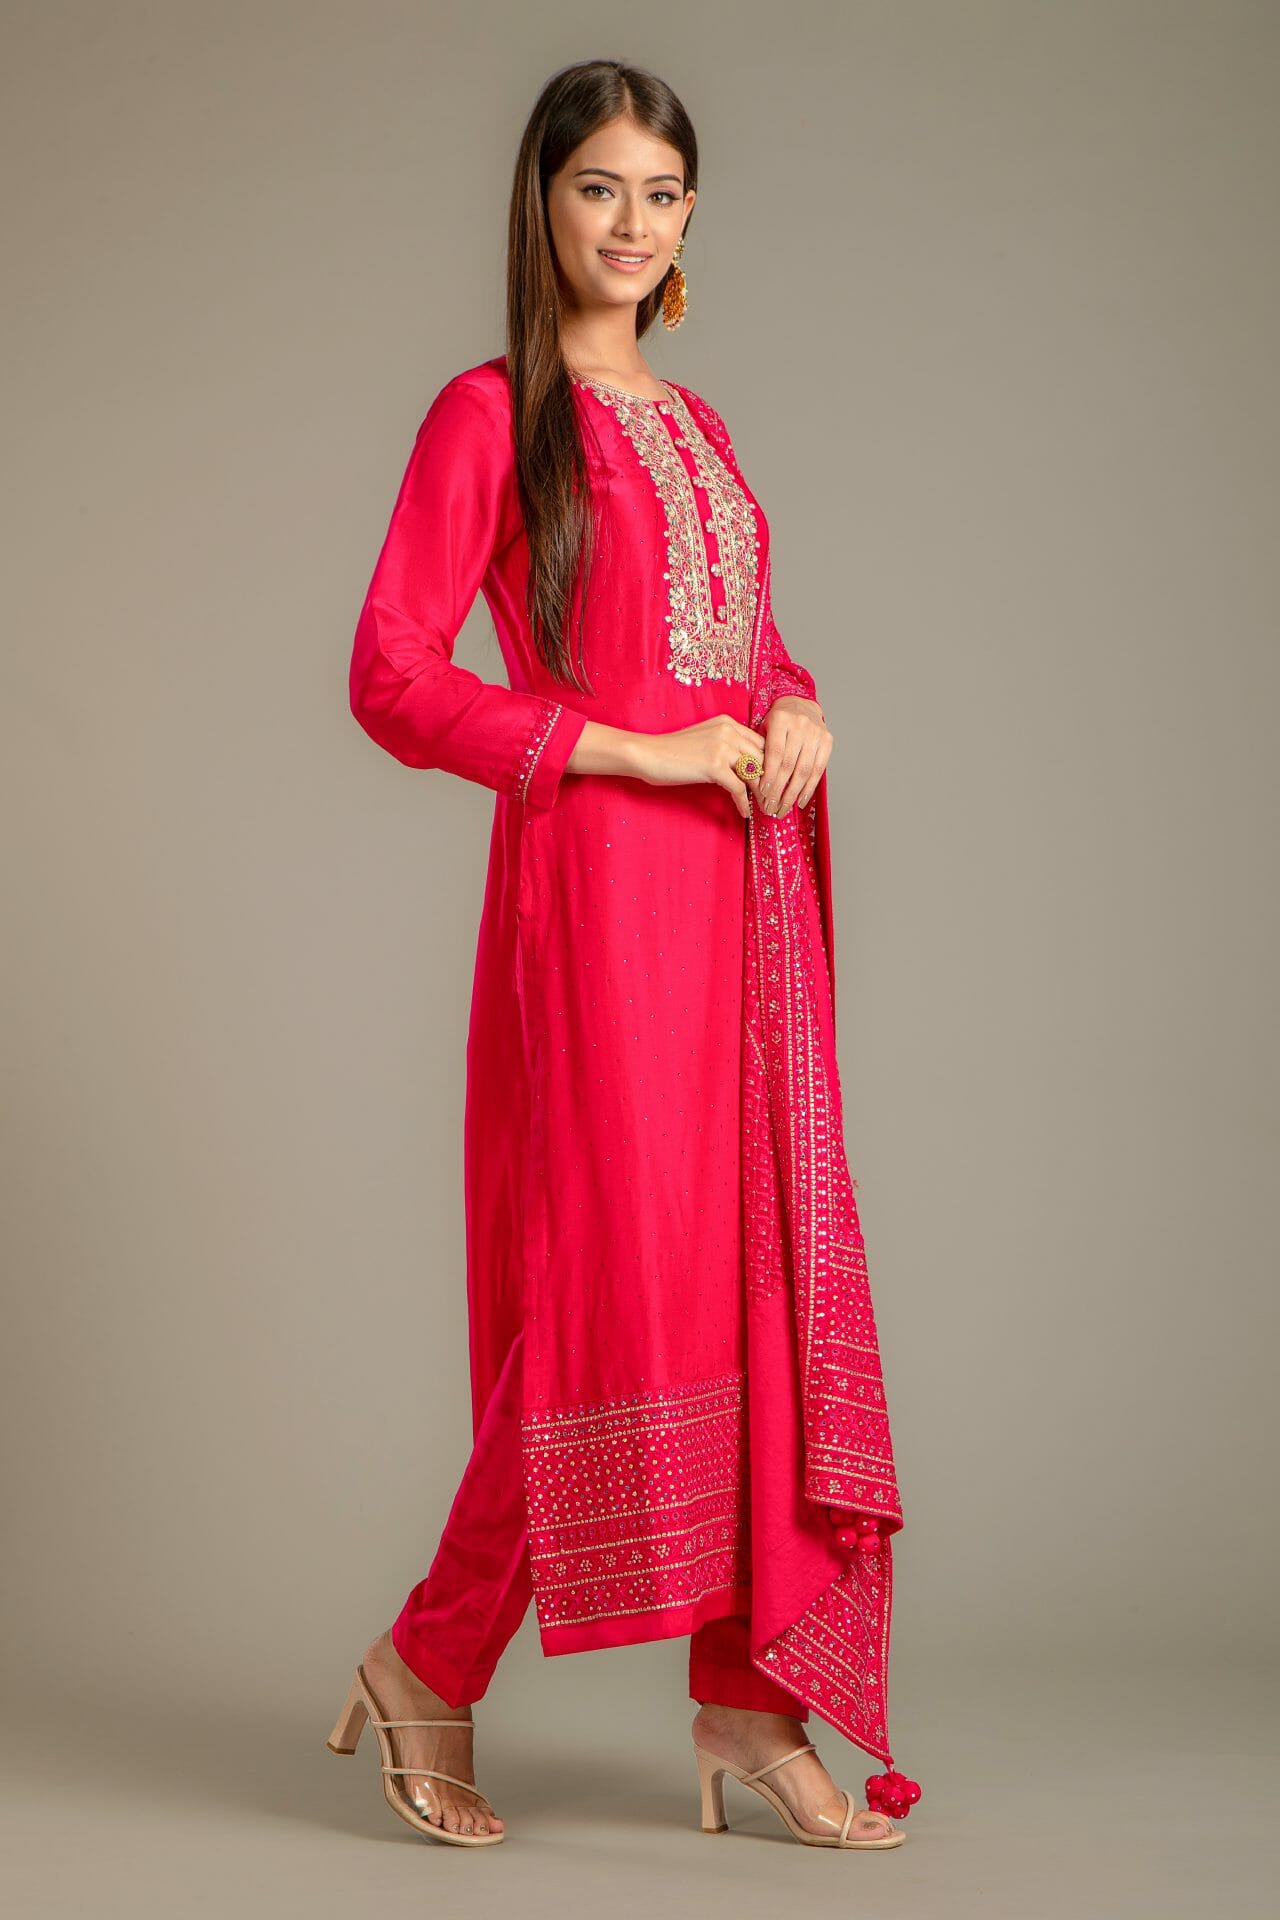 Cherry Red Embroidered Silk Suit With an Unstitched Salwar Fabric